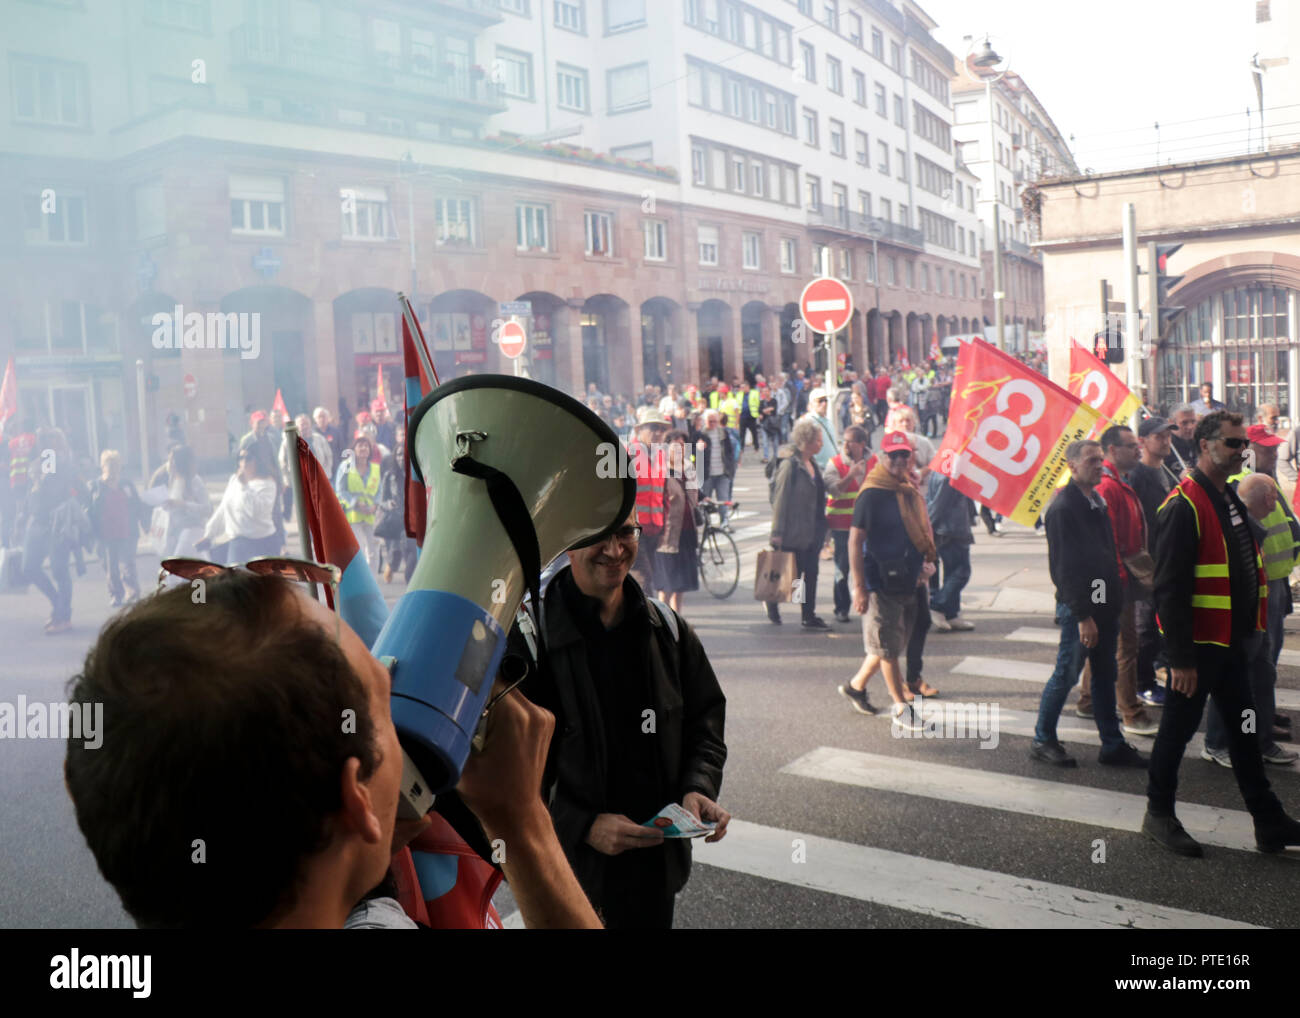 A man seen speaking on a megaphone during the protest. People demonstrate during a one-day nationwide strike over French President Emmanuel Macron's policies in Strasbourg, eastern France. Stock Photo